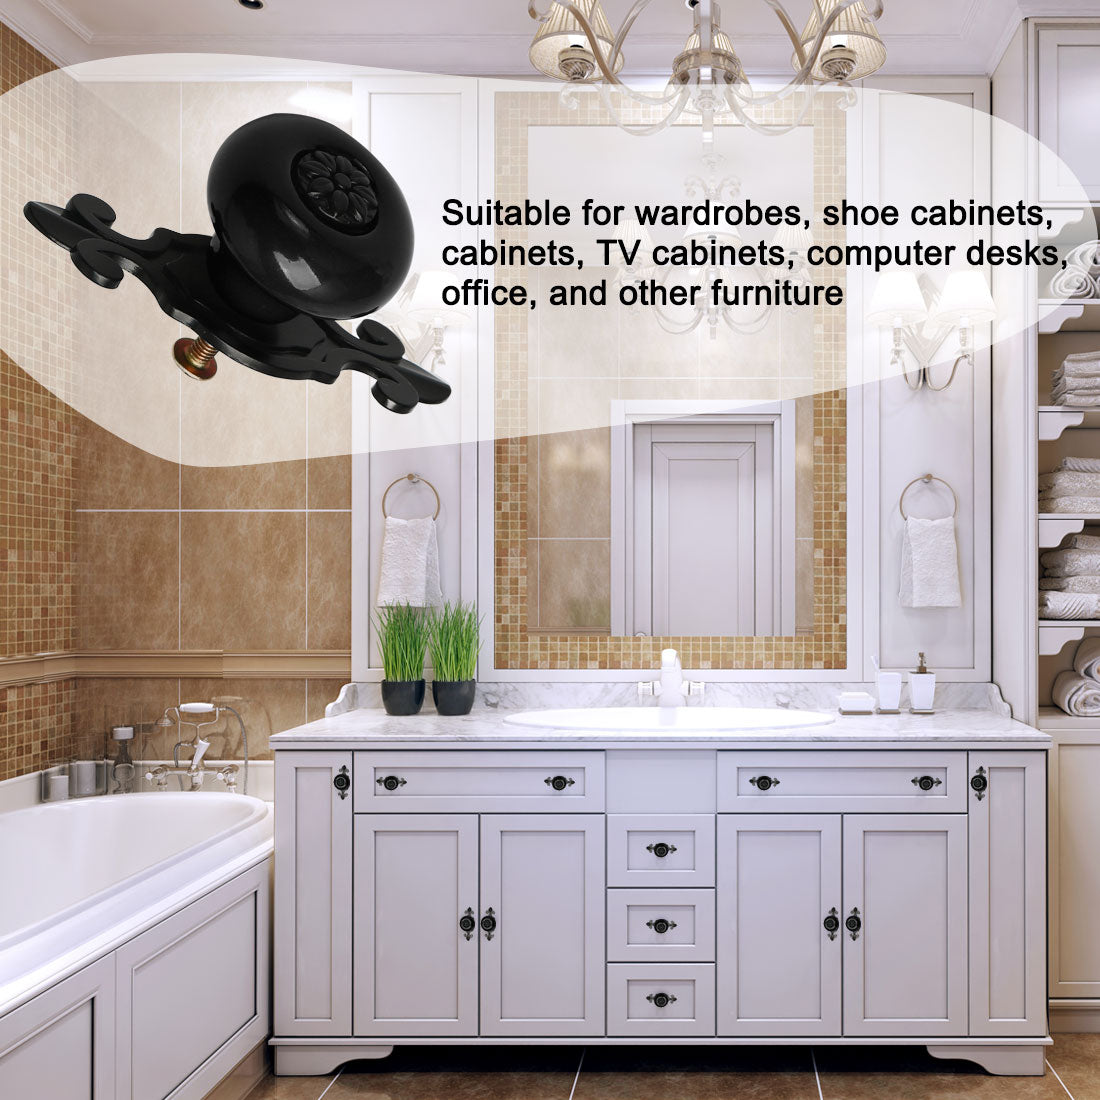 uxcell Uxcell Ceramic Vintage Knobs Drawer Pull Handle Cupboard Wardrobe Cabinet 4pcs Black